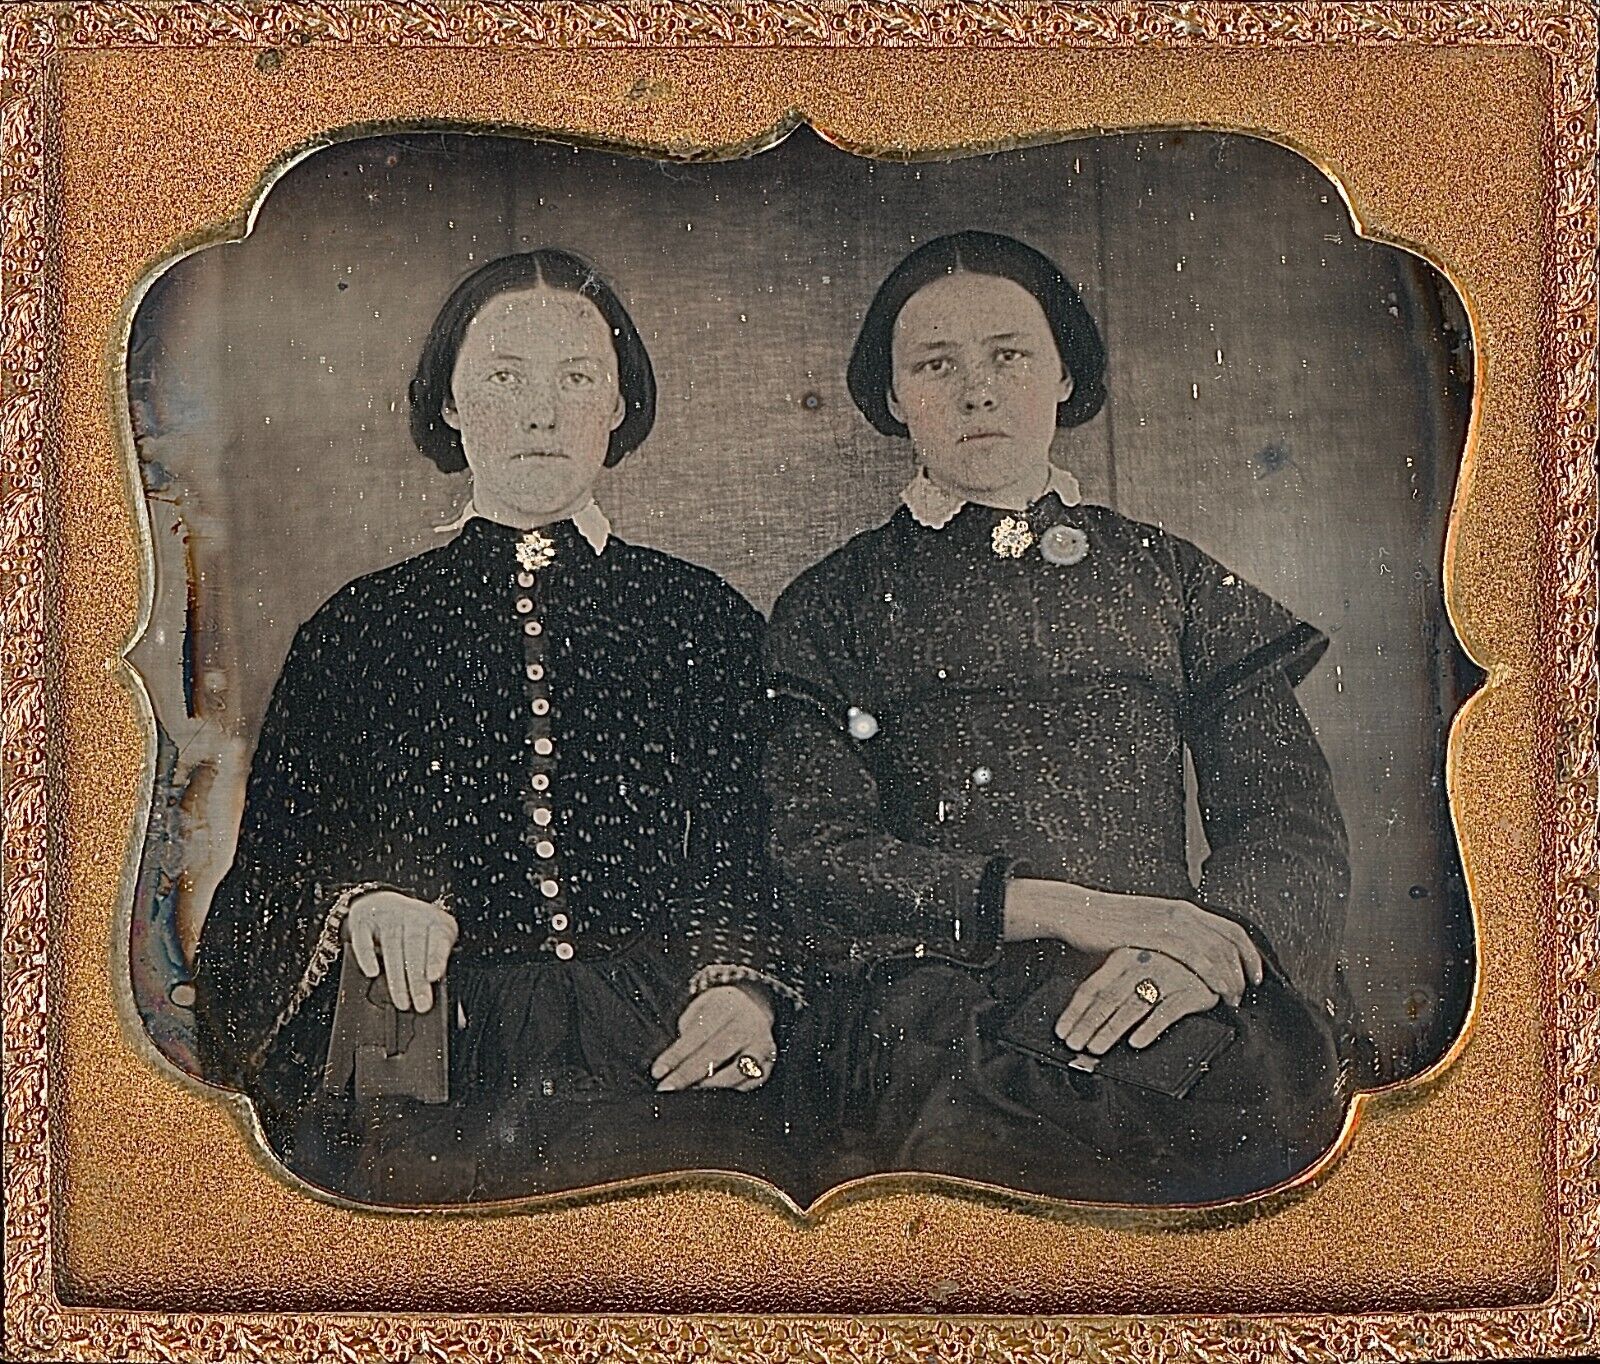 Identified Young Sisters Gold Tinted Wedding Rings 1/6 Plate Daguerreotype S182